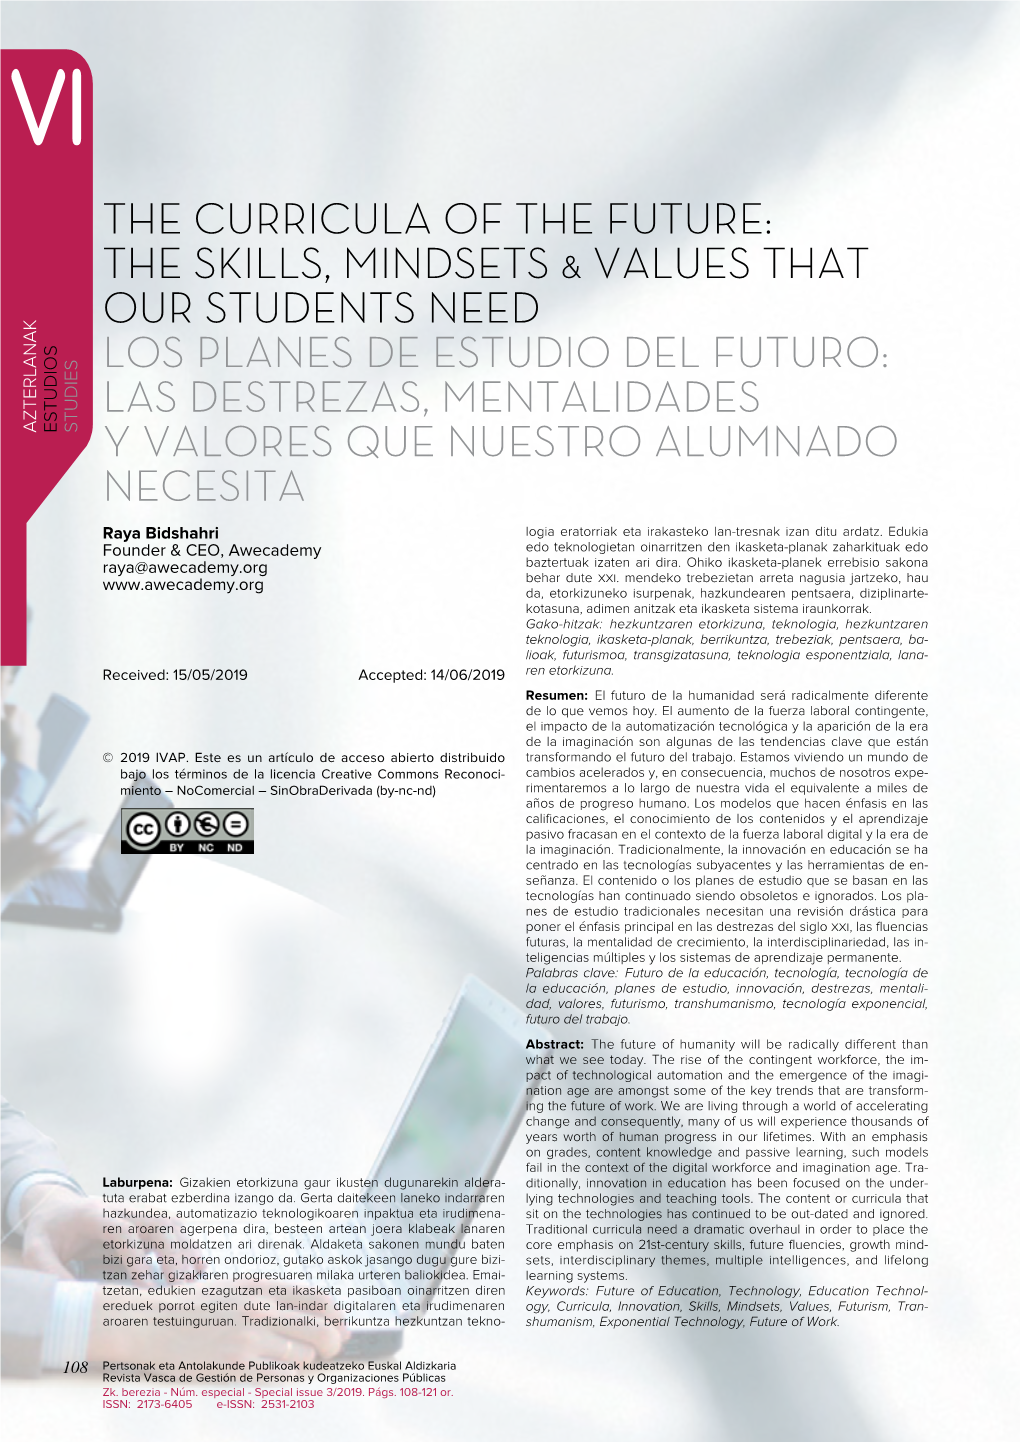 The Curricula of the Future: the Skills, Mindsets